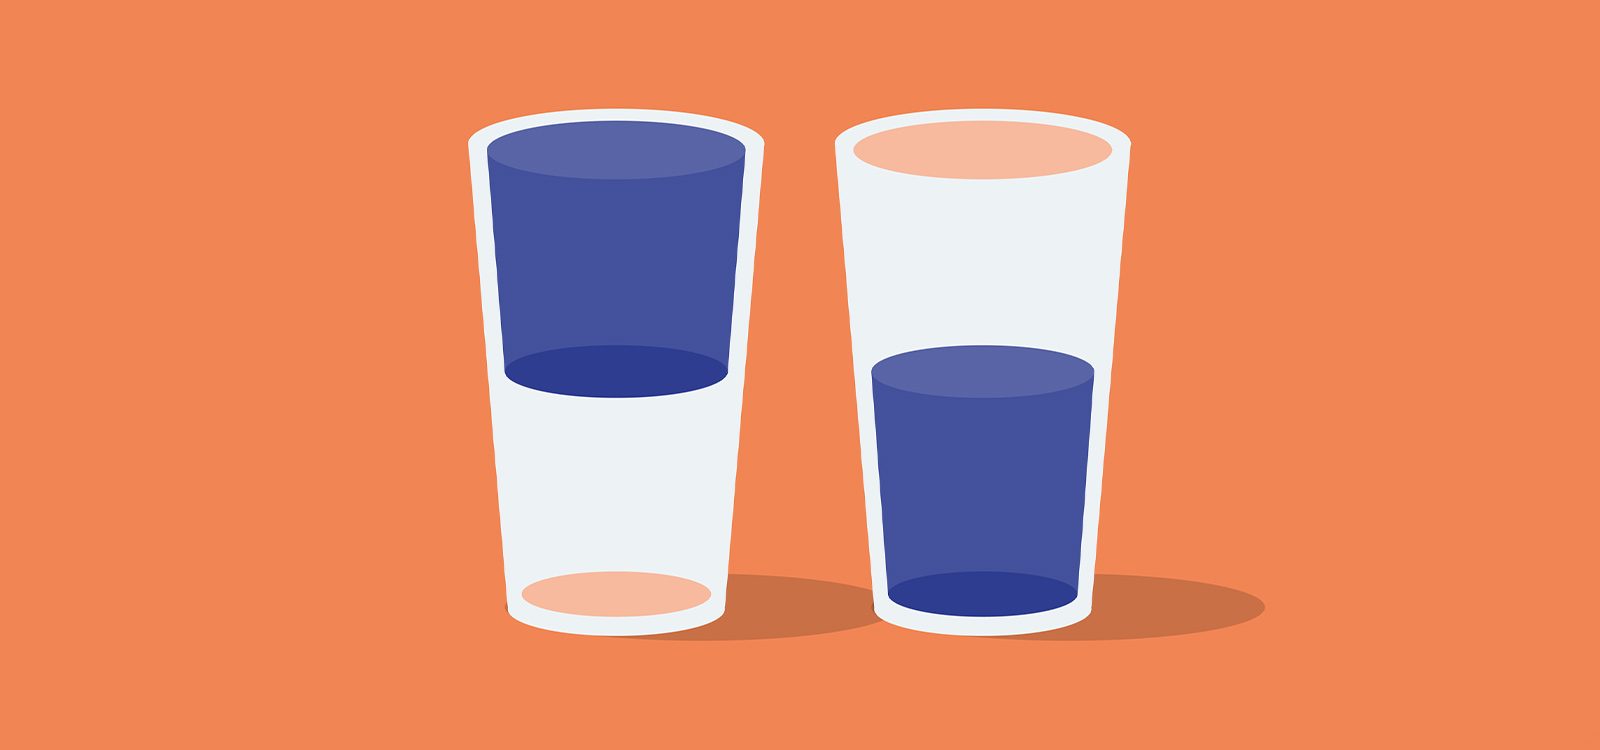 Industry climate risk practices self-assessment: A glass half full or a glass half empty?